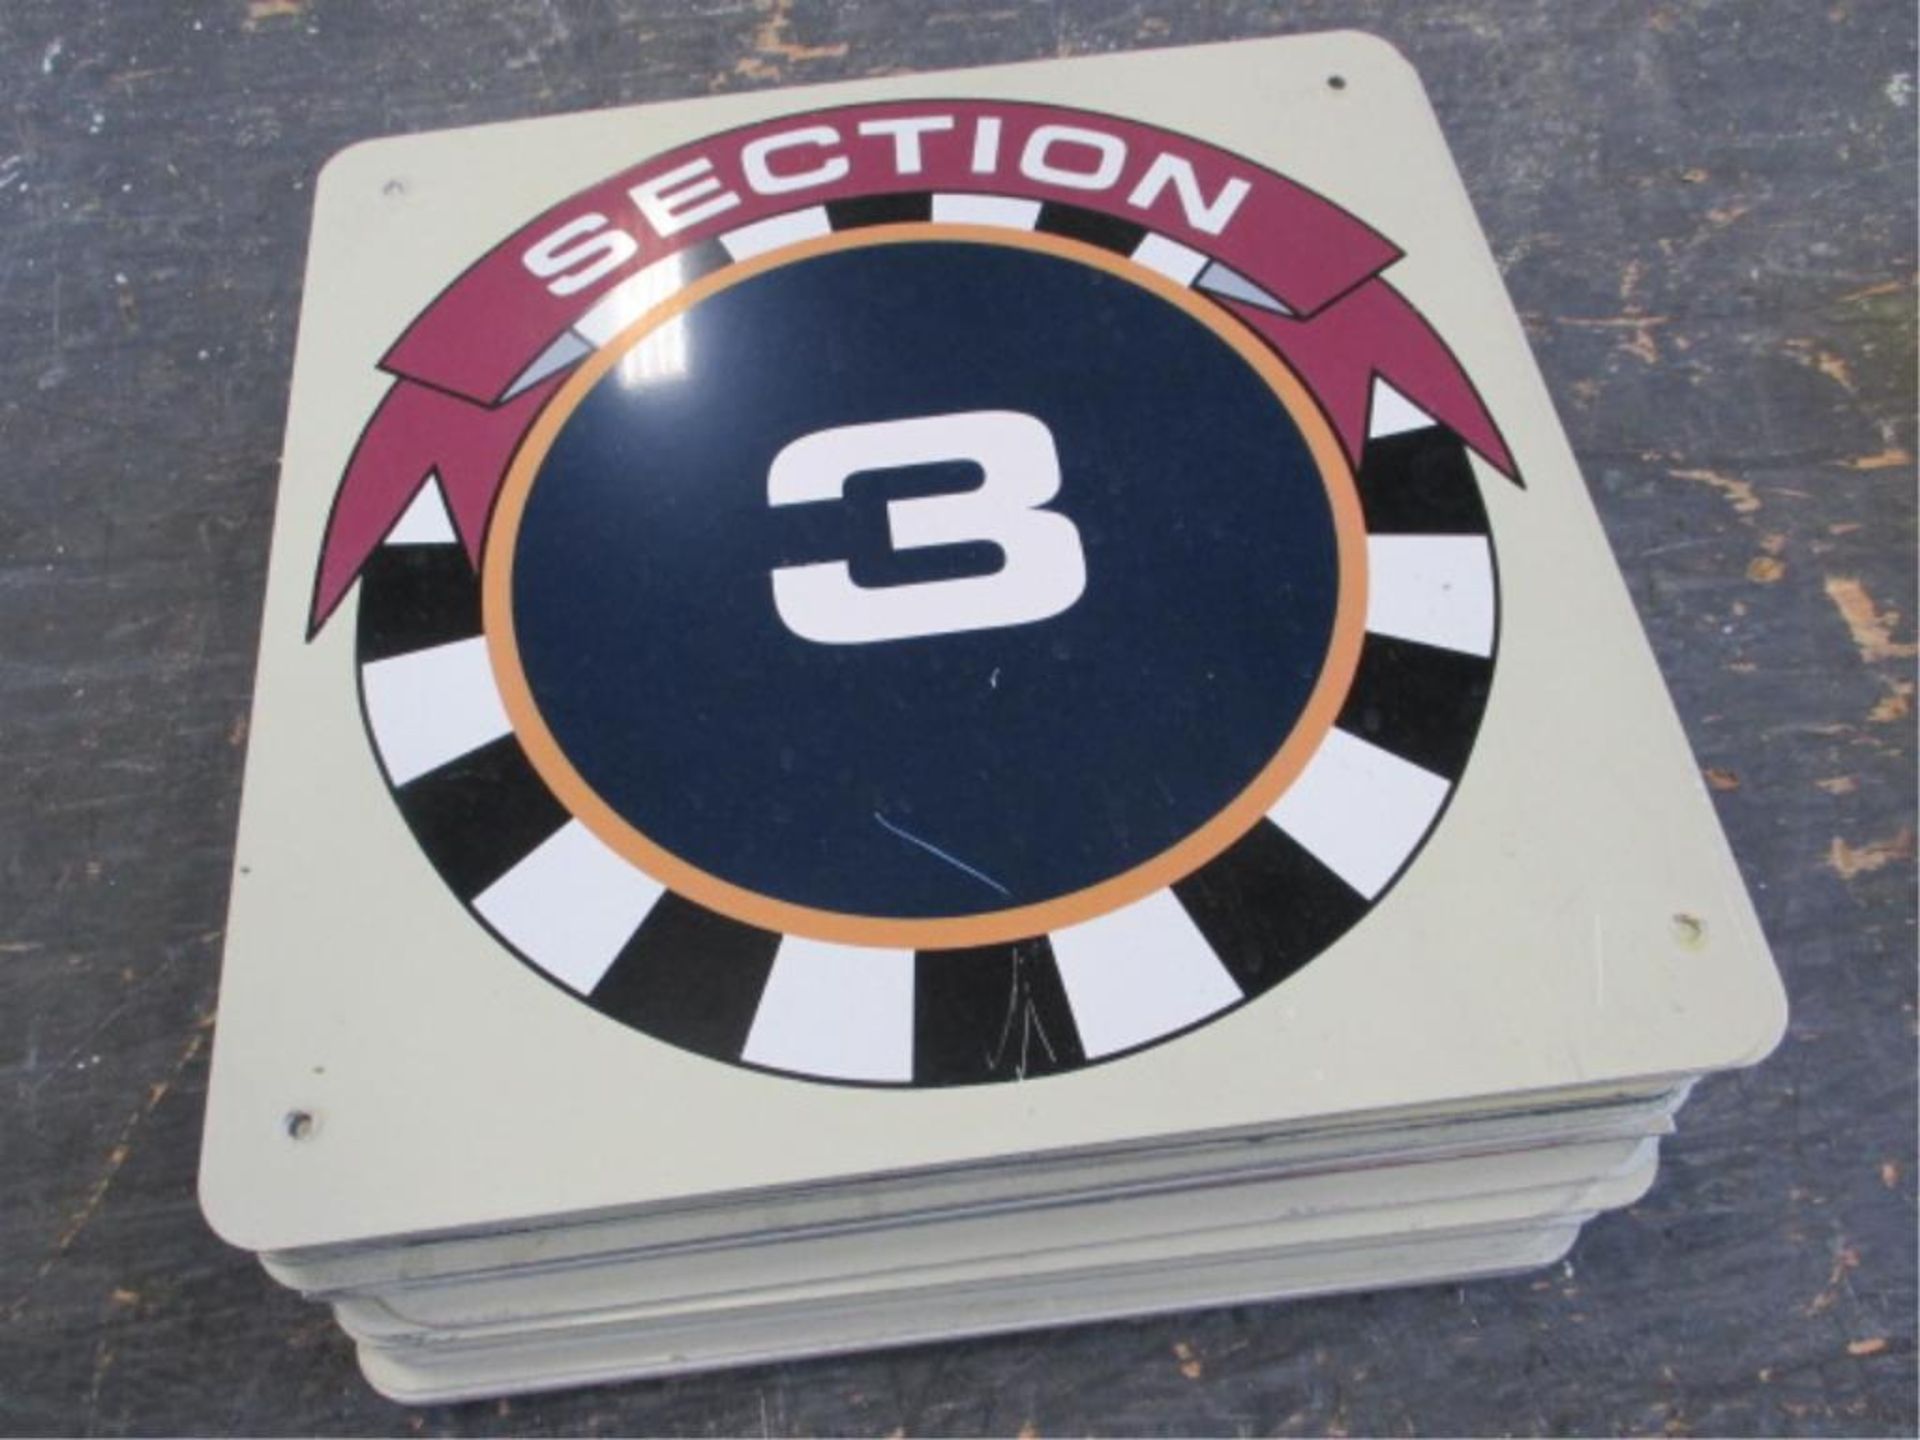 Section 3 Sign